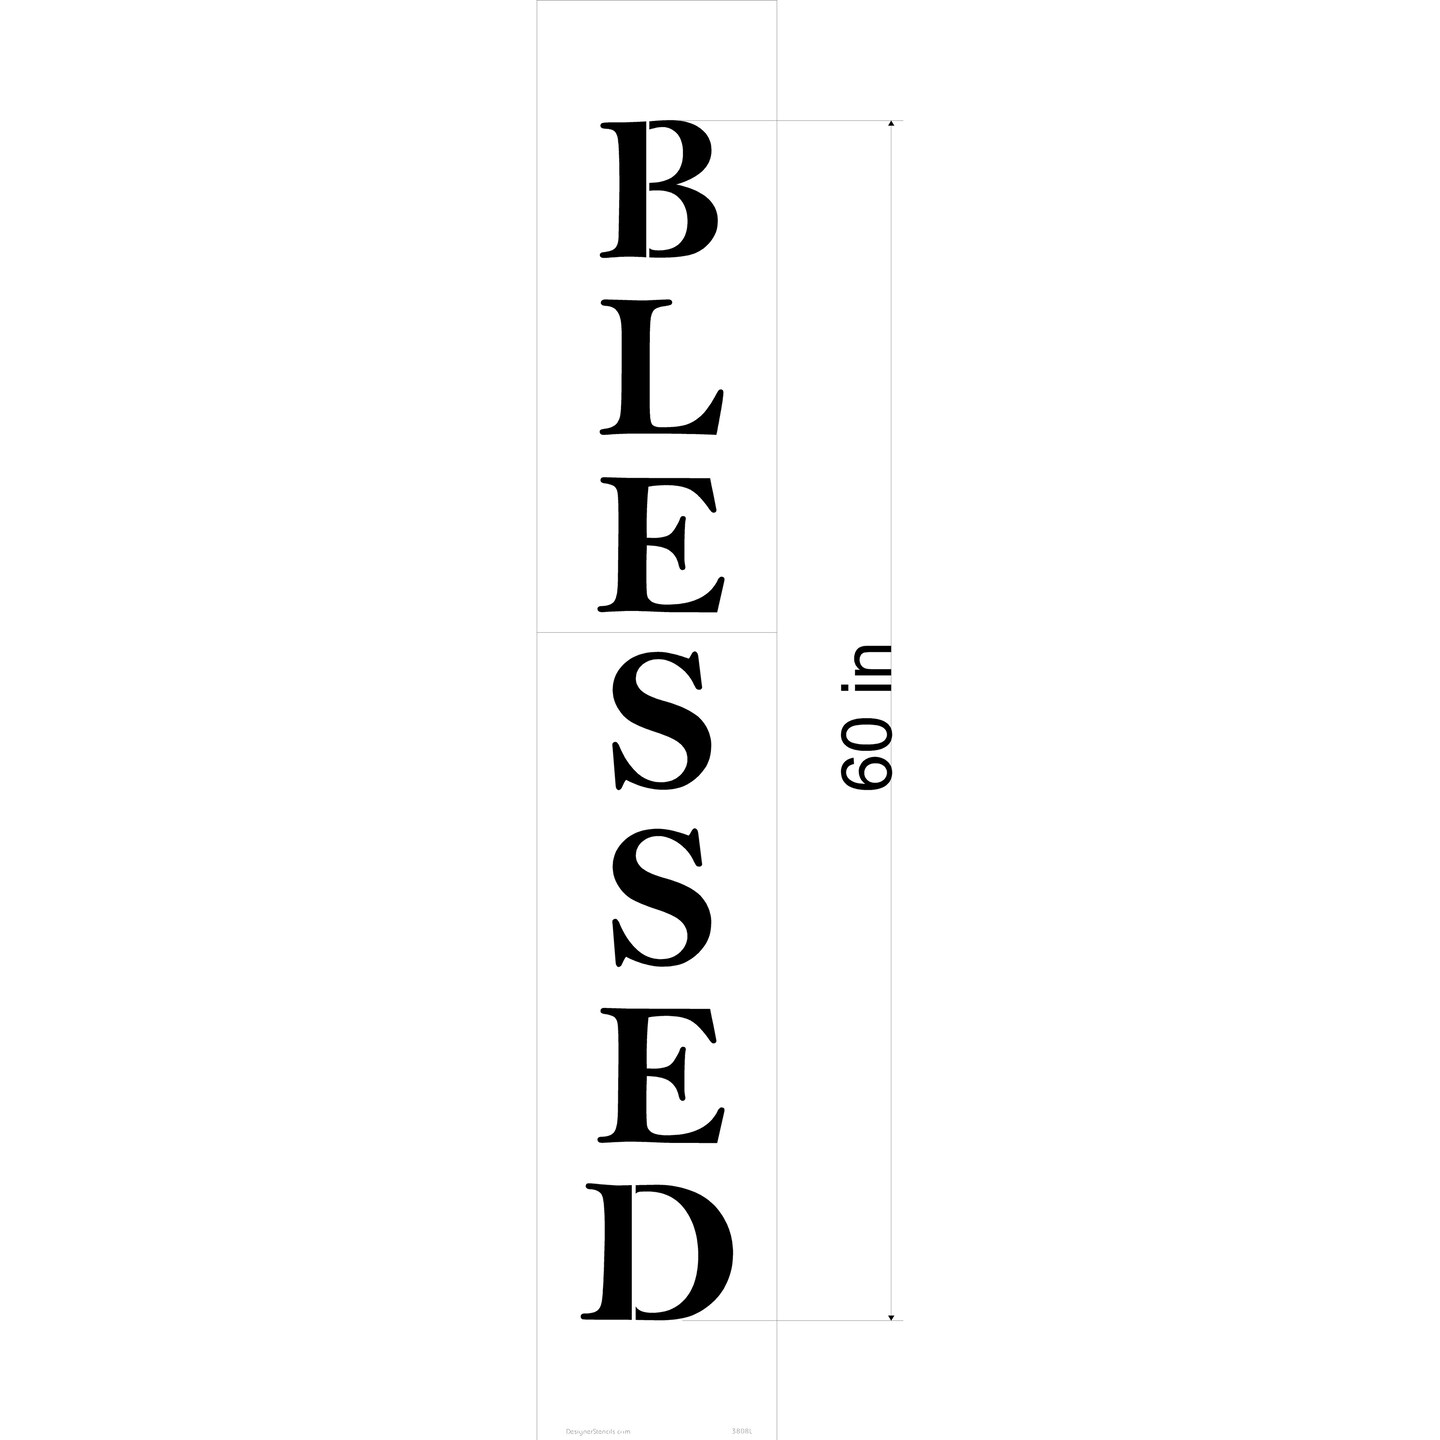 60-Inch Blessed Tall Wall Stencil | 3808L by Designer Stencils | Word &#x26; Phrase Stencils | Reusable Art Craft Stencils for Painting on Walls, Canvas, Wood | Reusable Plastic Paint Stencil for Home Makeover | Easy to Use &#x26; Clean Art Stencil